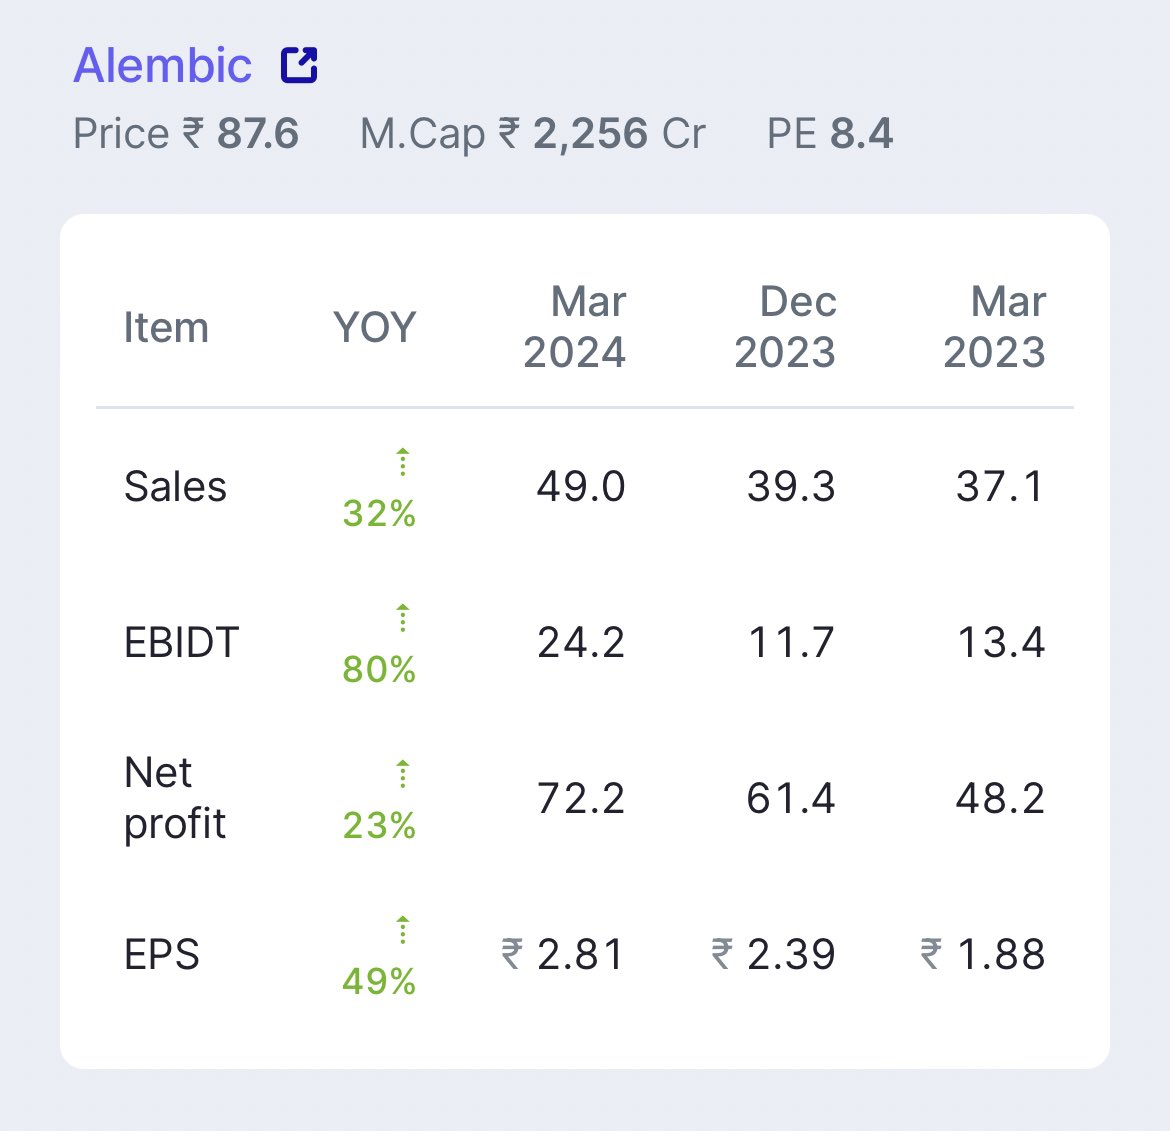 SUPER STRONG Q4FY24 RESULT BY ALEMBIC LTD 🔥🔥

Vet high growth in earnings 
Highest Ever Revenue, EBITDA & margins reported 
Net profit up 18% QOQ & 50% YOY 
Valuation wise undervalued at a forward PE of just 7.8 
Stock is also available at book value